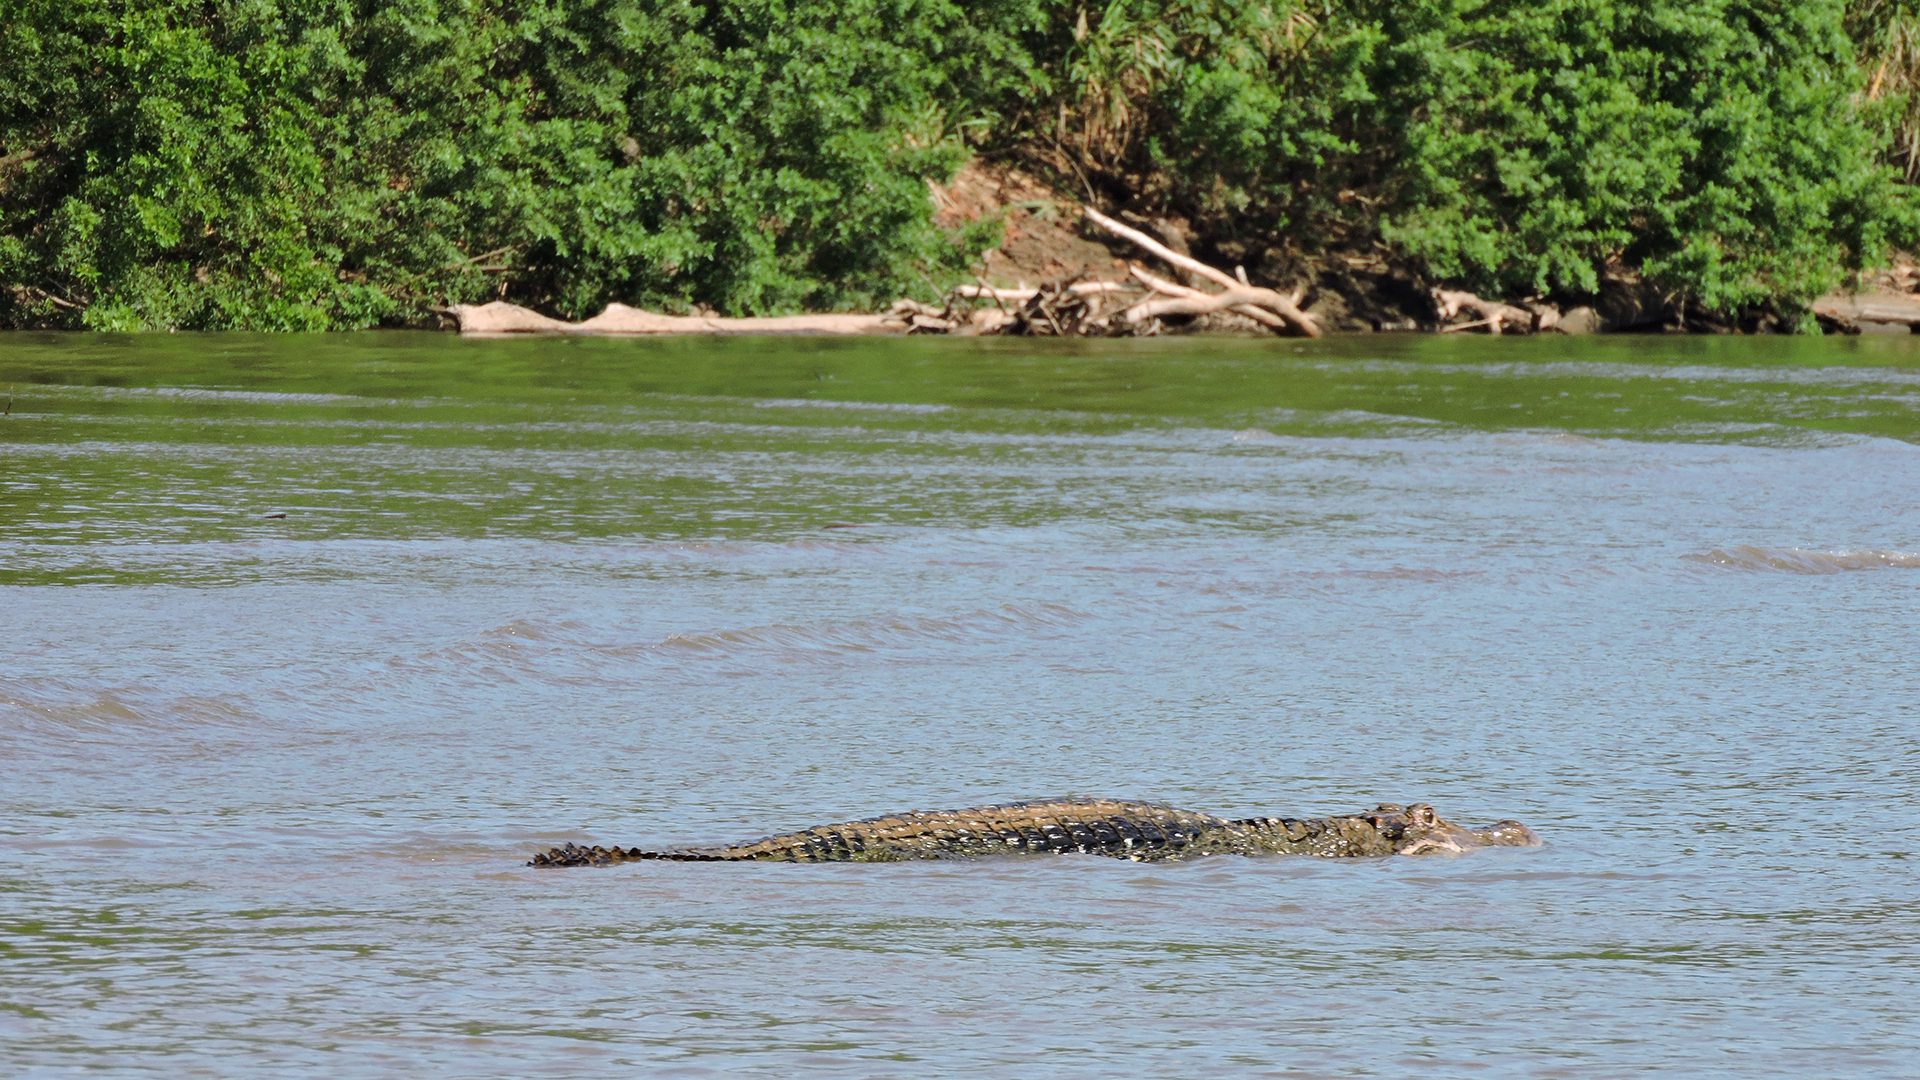 Big Black Caiman in the middle of the river | Responsible Travel Peru